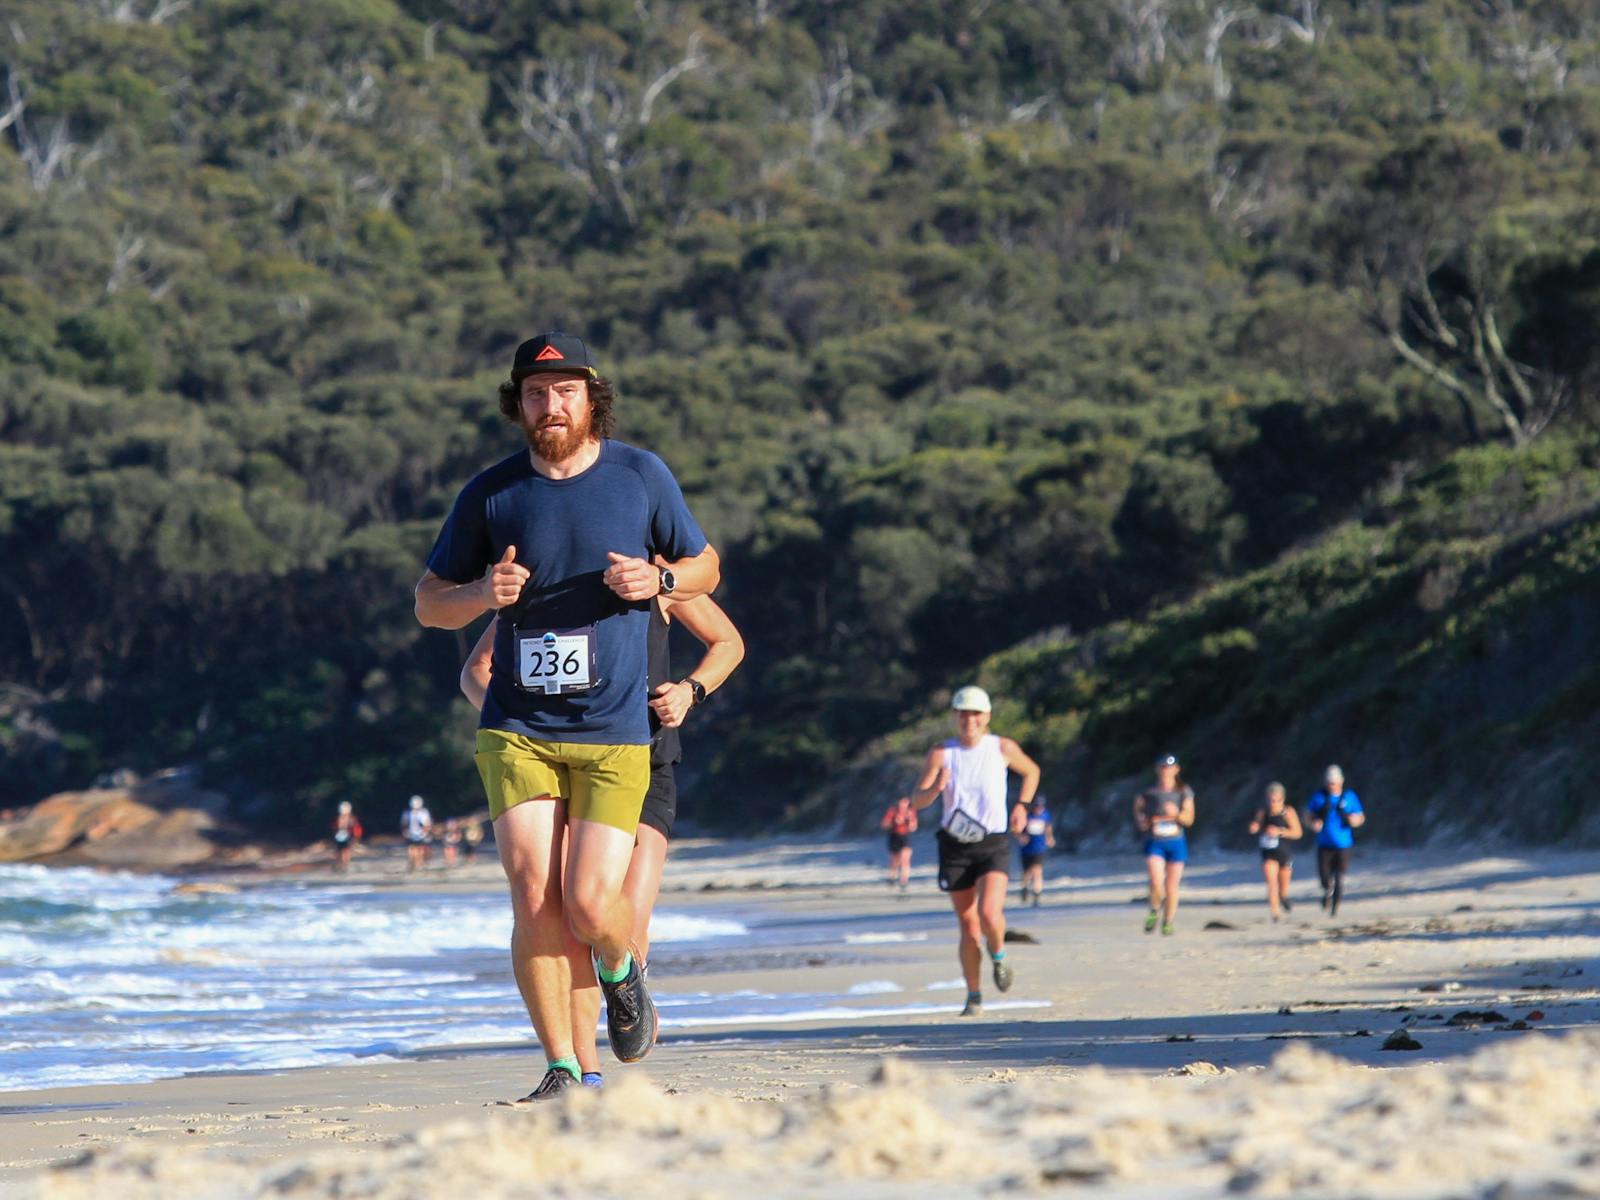 Running in the Trail Run stage of the Freycinet Challenge at Coles Bay in Tasmania.